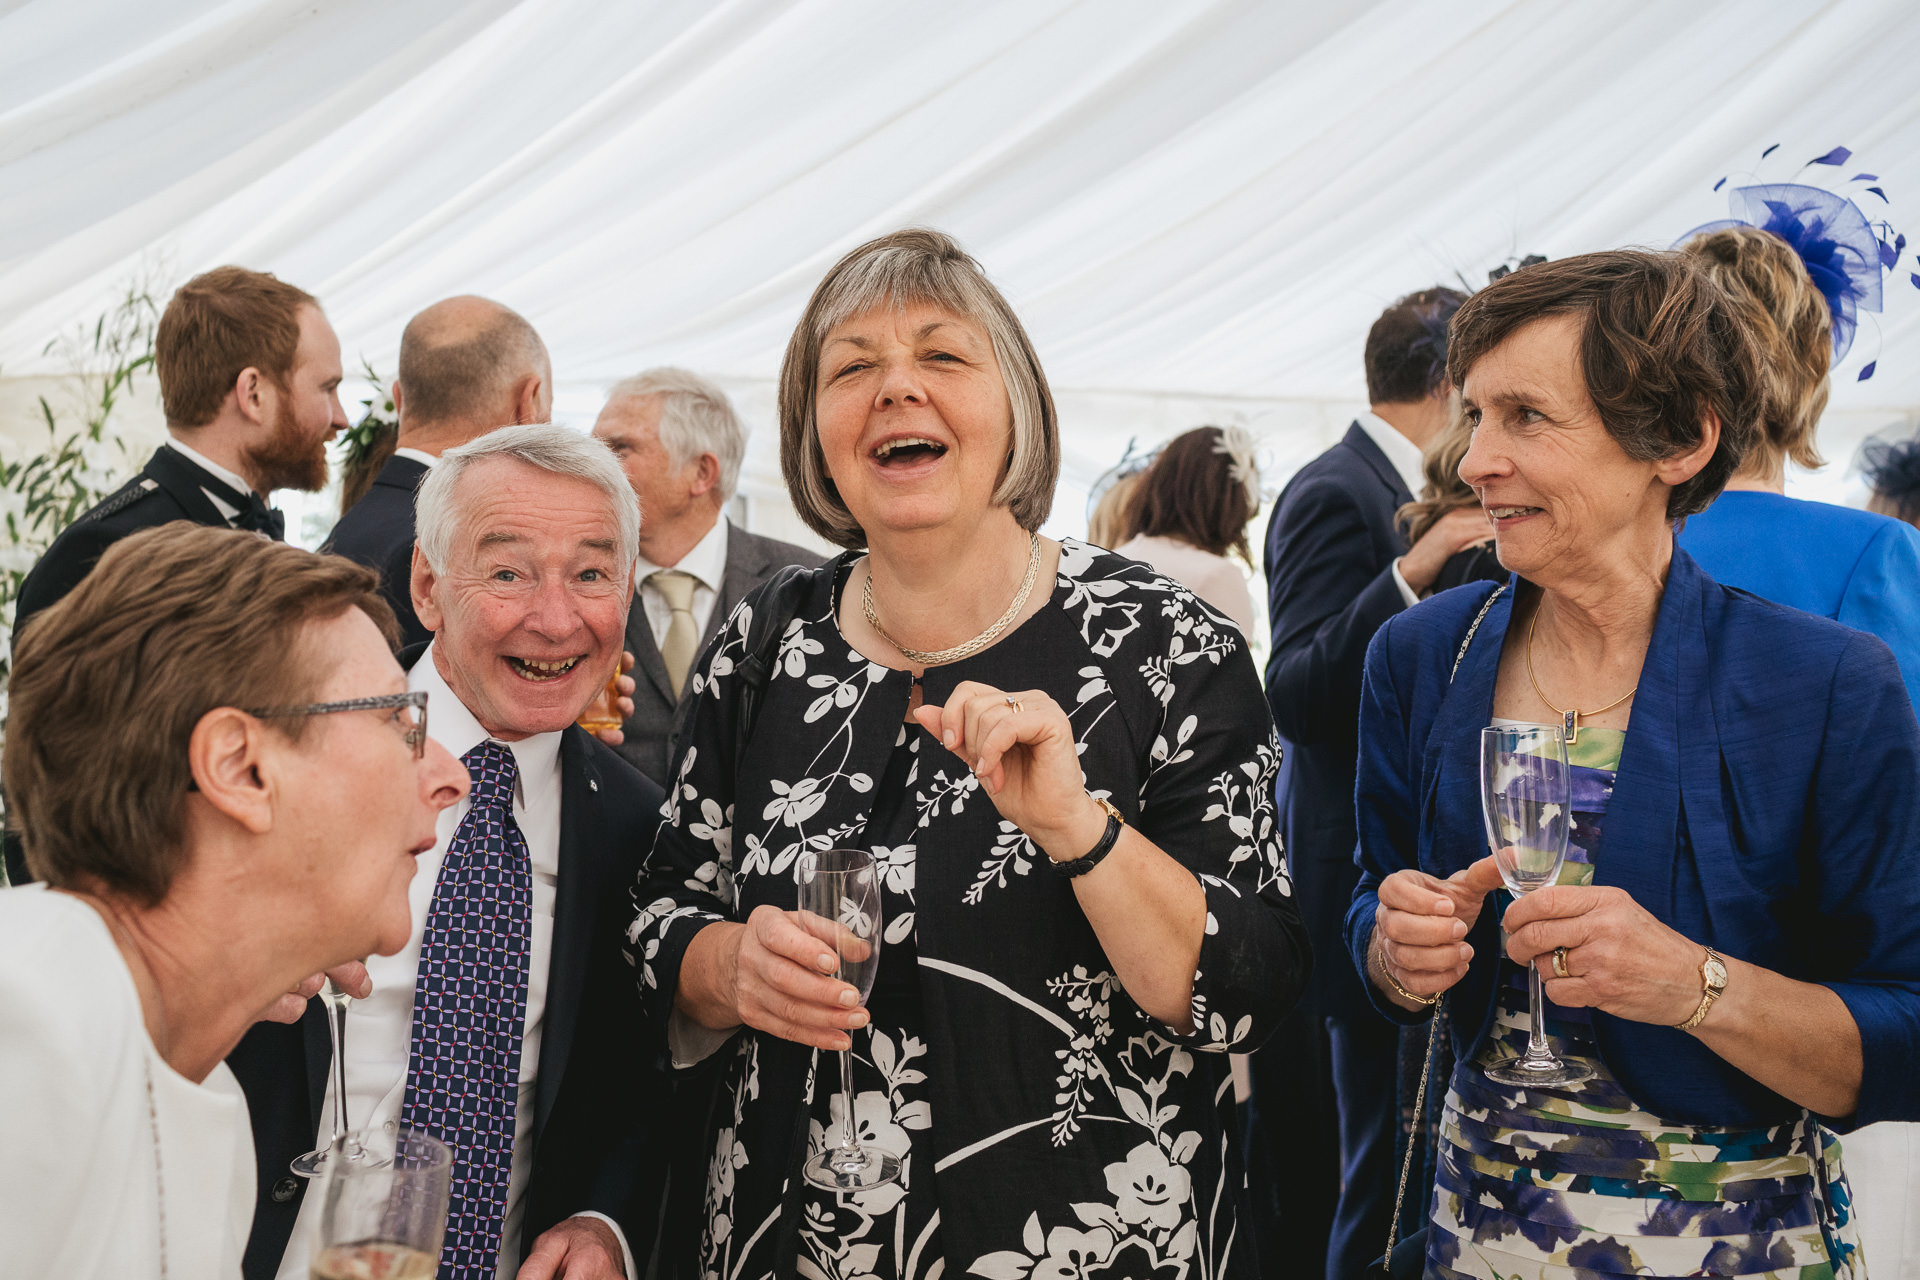 Guests laughing inside a marquee